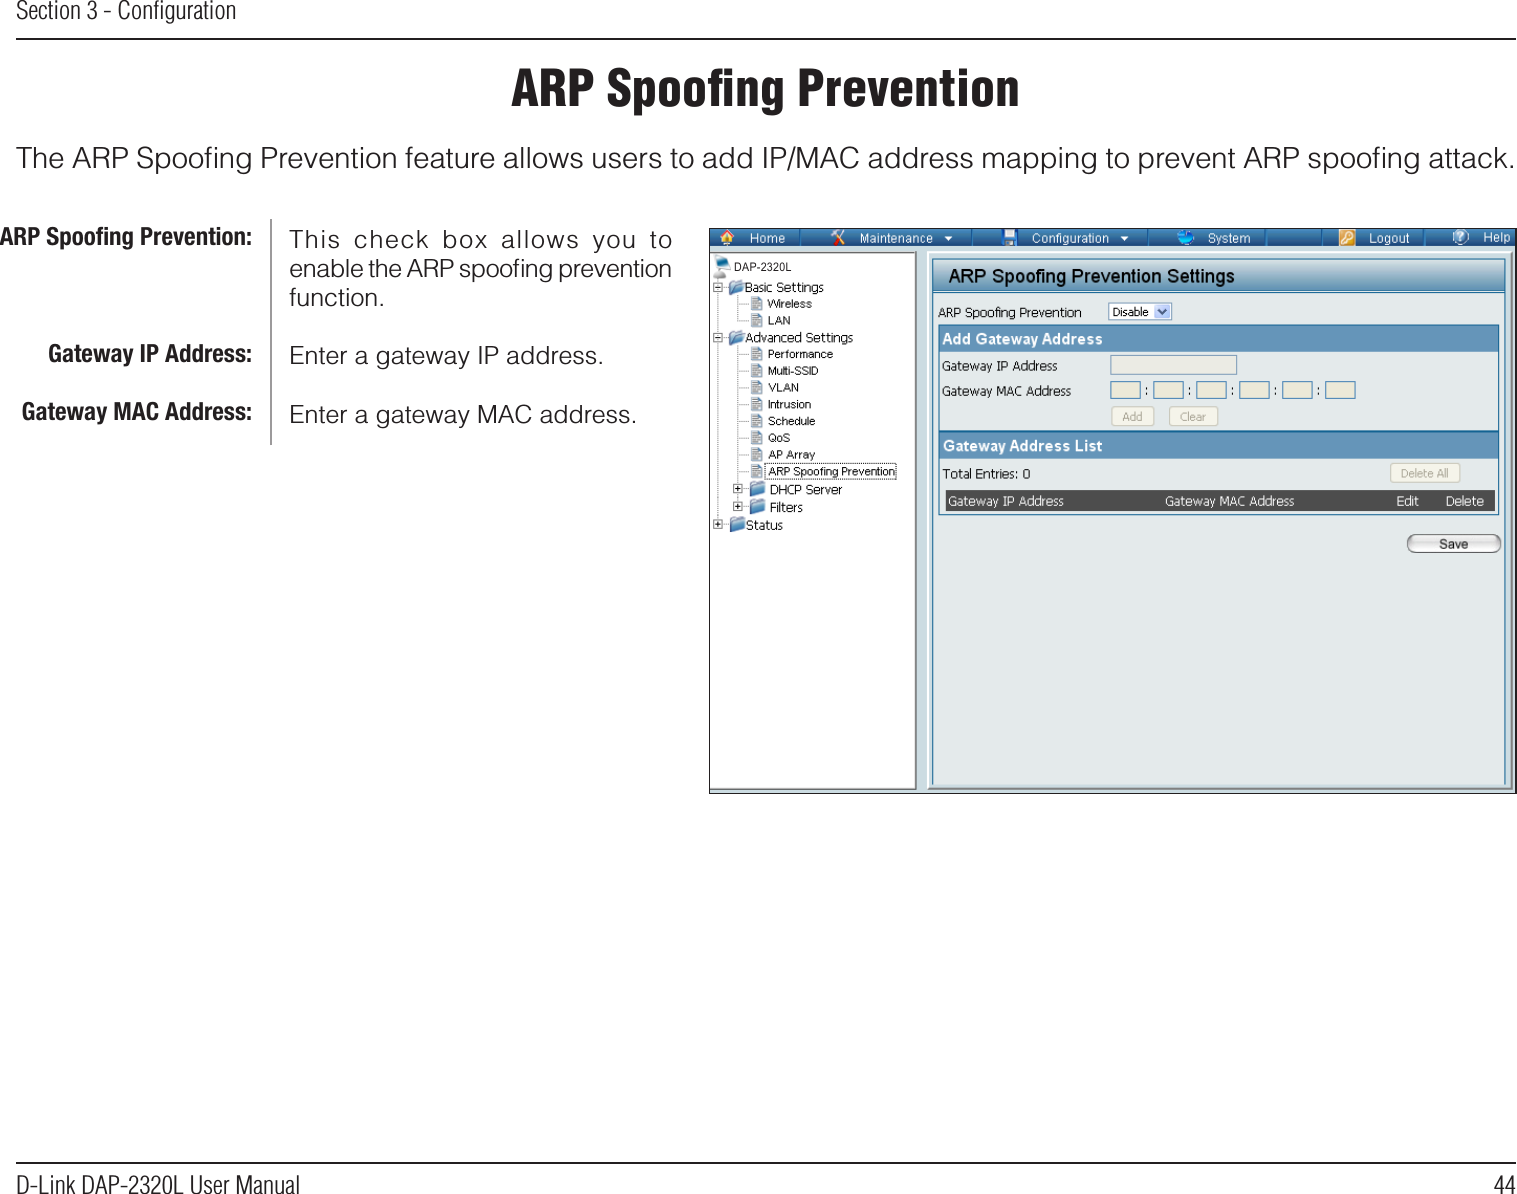 44D-Link DAP-2320L User ManualSection 3 - ConﬁgurationARP Spooﬁng PreventionThe ARP Spooﬁng Prevention feature allows users to add IP/MAC address mapping to prevent ARP spooﬁng attack.This  check  box  allows  you  to enable the ARP spooﬁng prevention function.Enter a gateway IP address.Enter a gateway MAC address.ARP Spooﬁng Prevention:Gateway IP Address:Gateway MAC Address:DAP-2320L